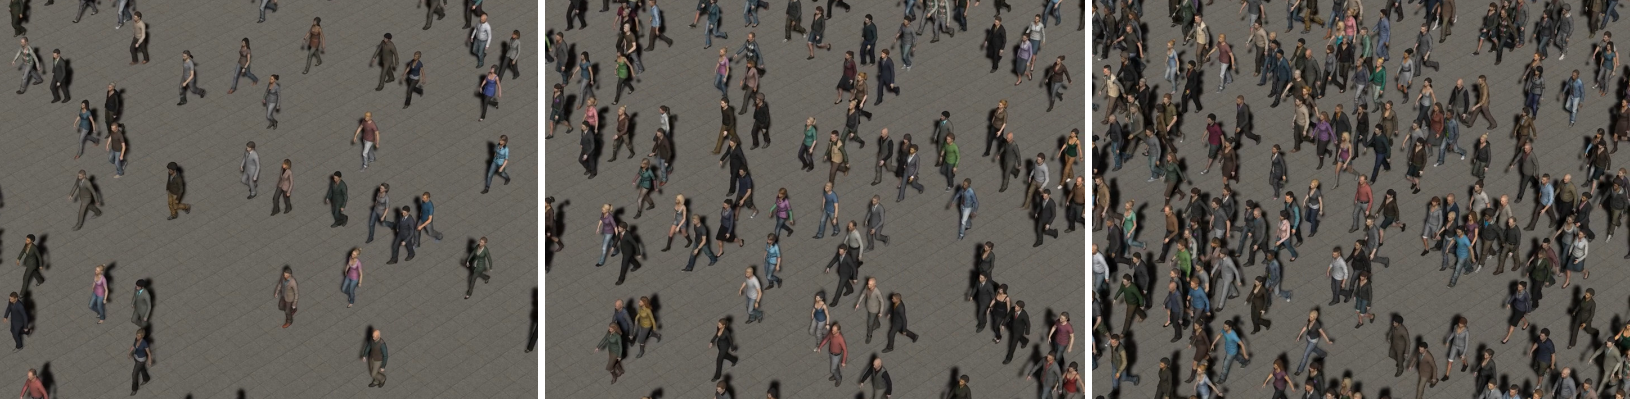 Examples of virtual crowds stimuli: (left) 250 characters animated with 1 female and 1 male motion, (centre) 500 characters animated with 25 female and 25 male synthetic motions, (right) 1000 characters animated with 500 female and 500 male synthetic motions (i.e. a unique motion per character).